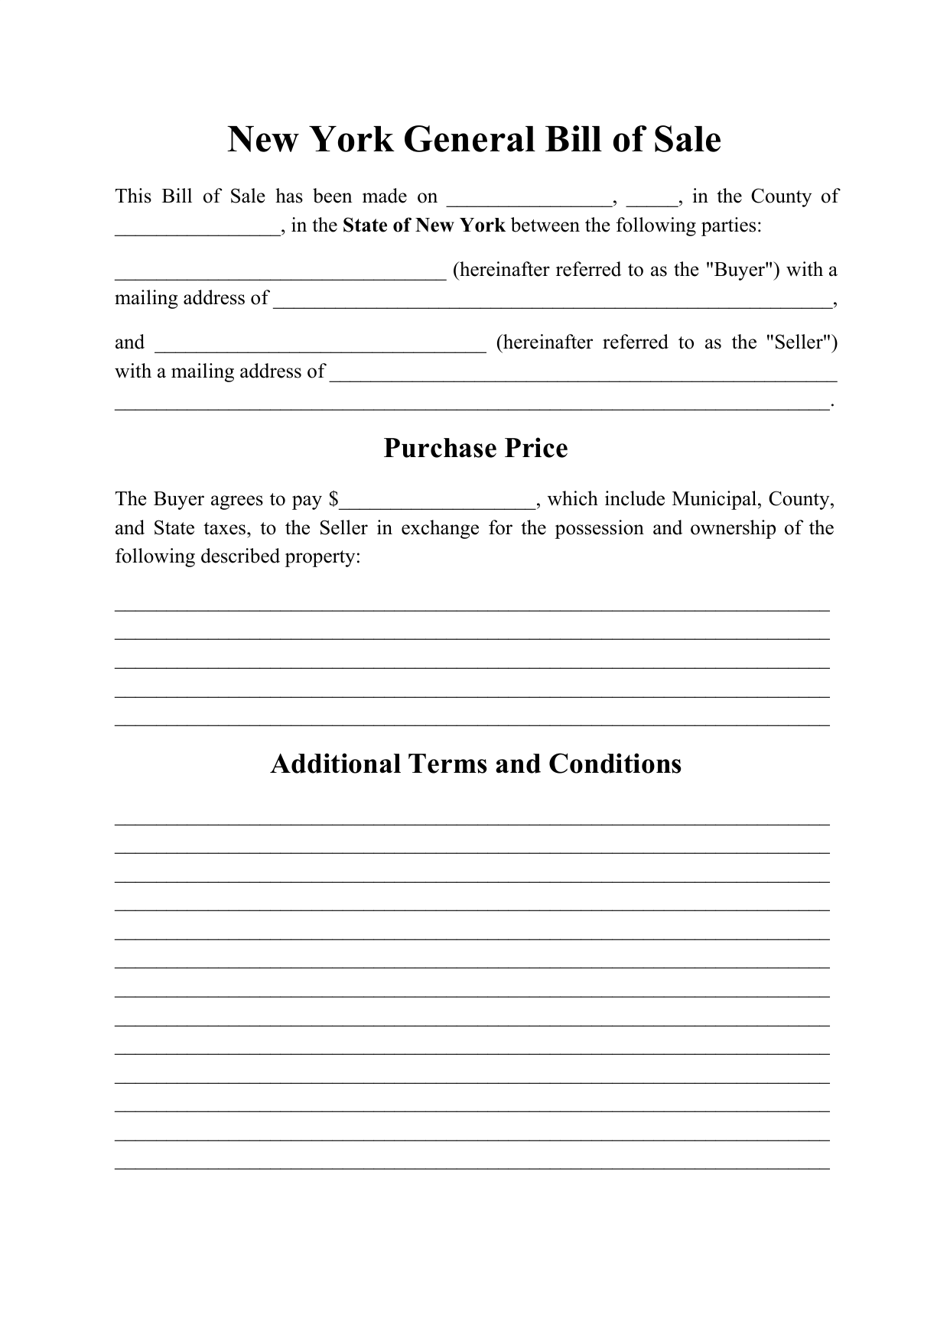 Generic Bill of Sale Form - New York, Page 1